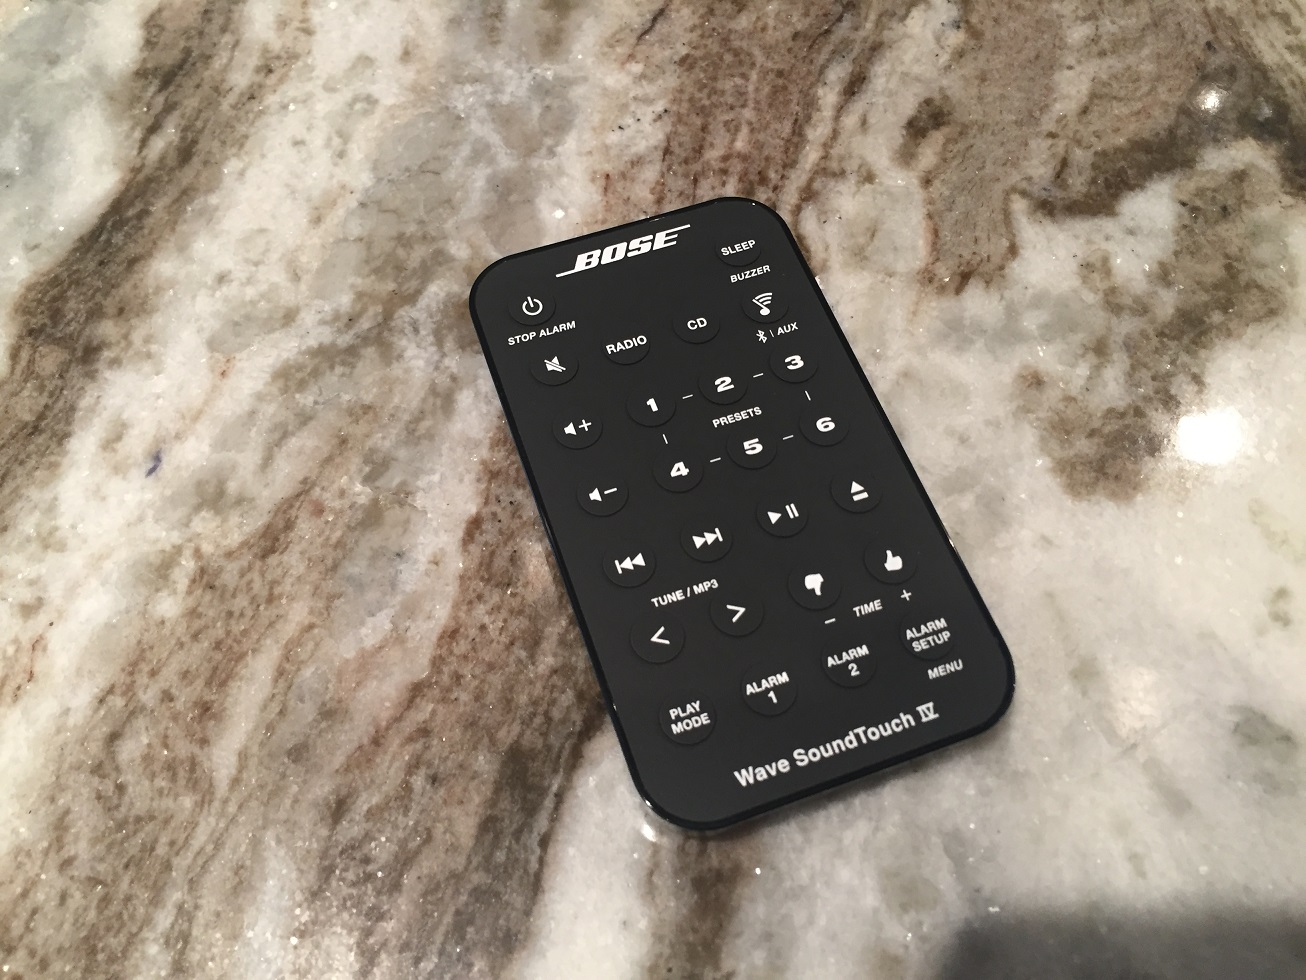 Bose Wave Soundtouch Remote